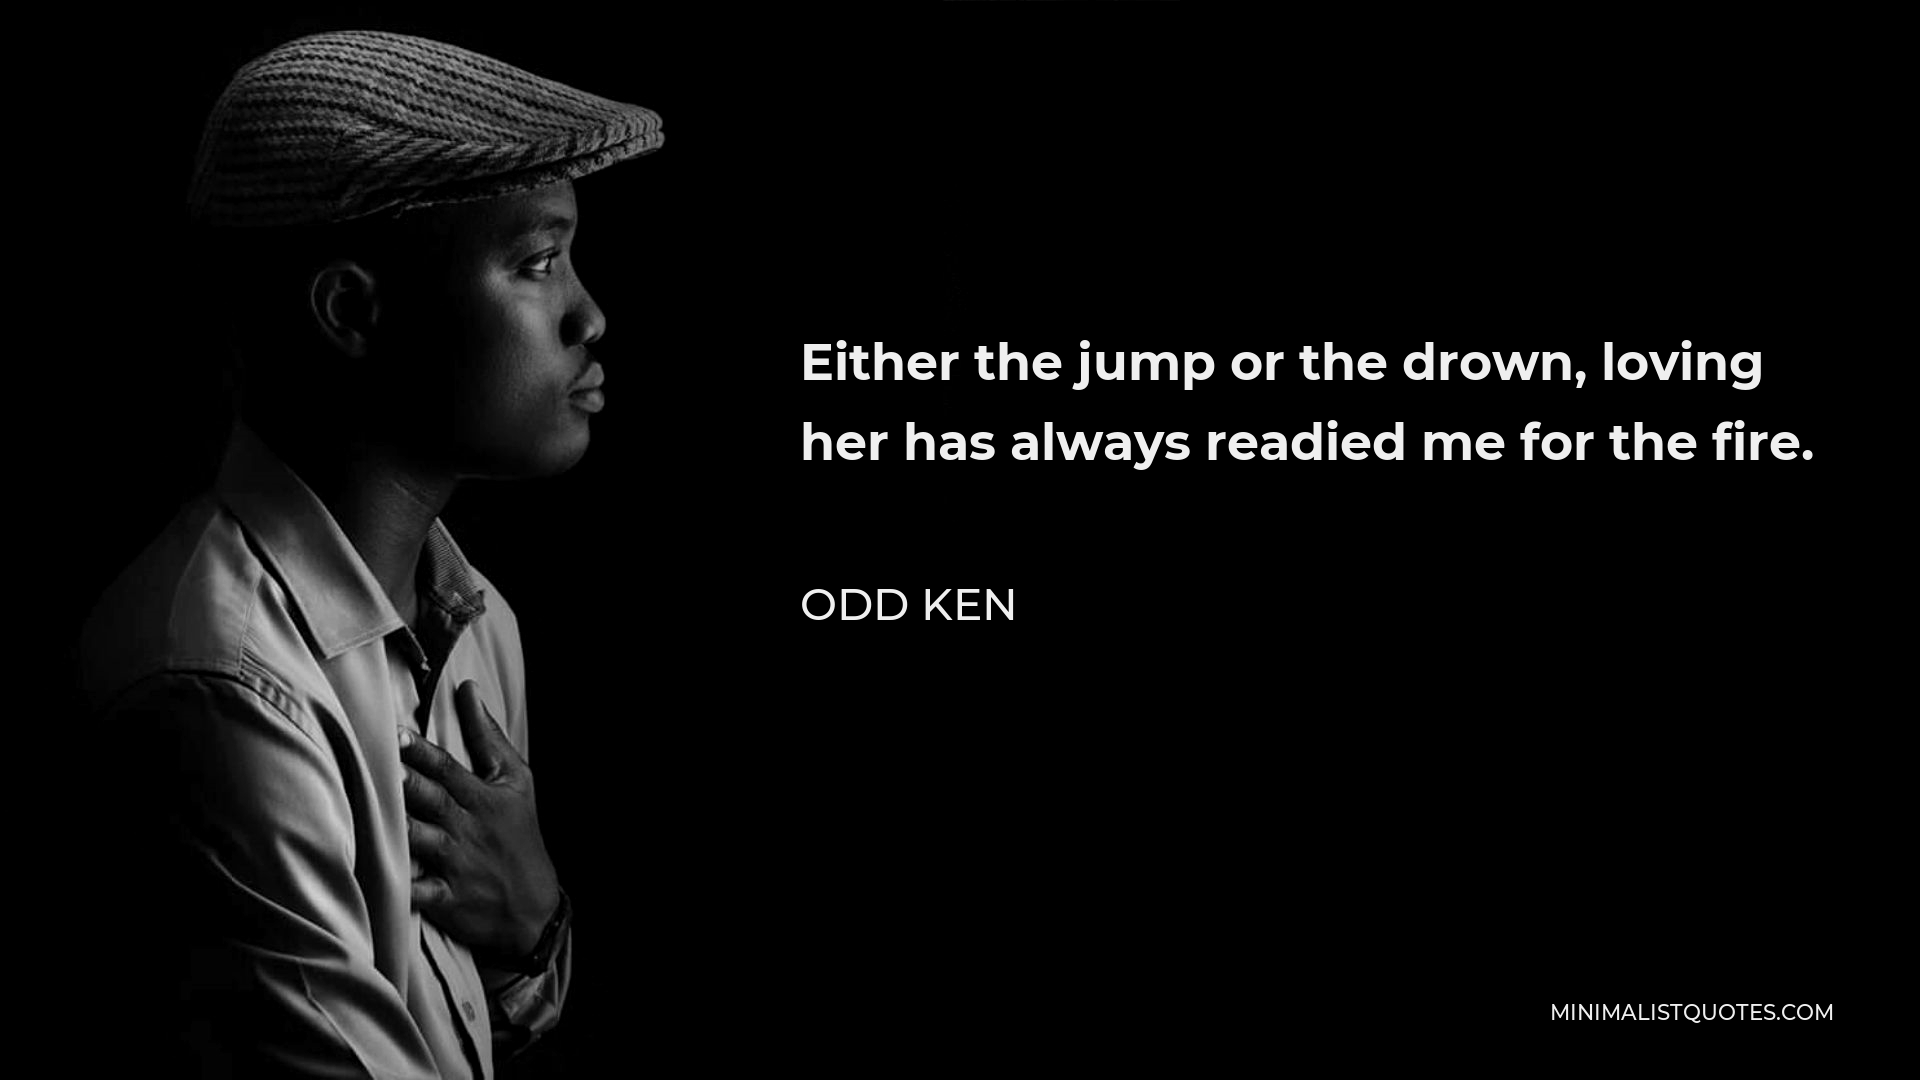 Odd Ken Quote - Either the jump or the drown, loving her has always readied me for the fire.